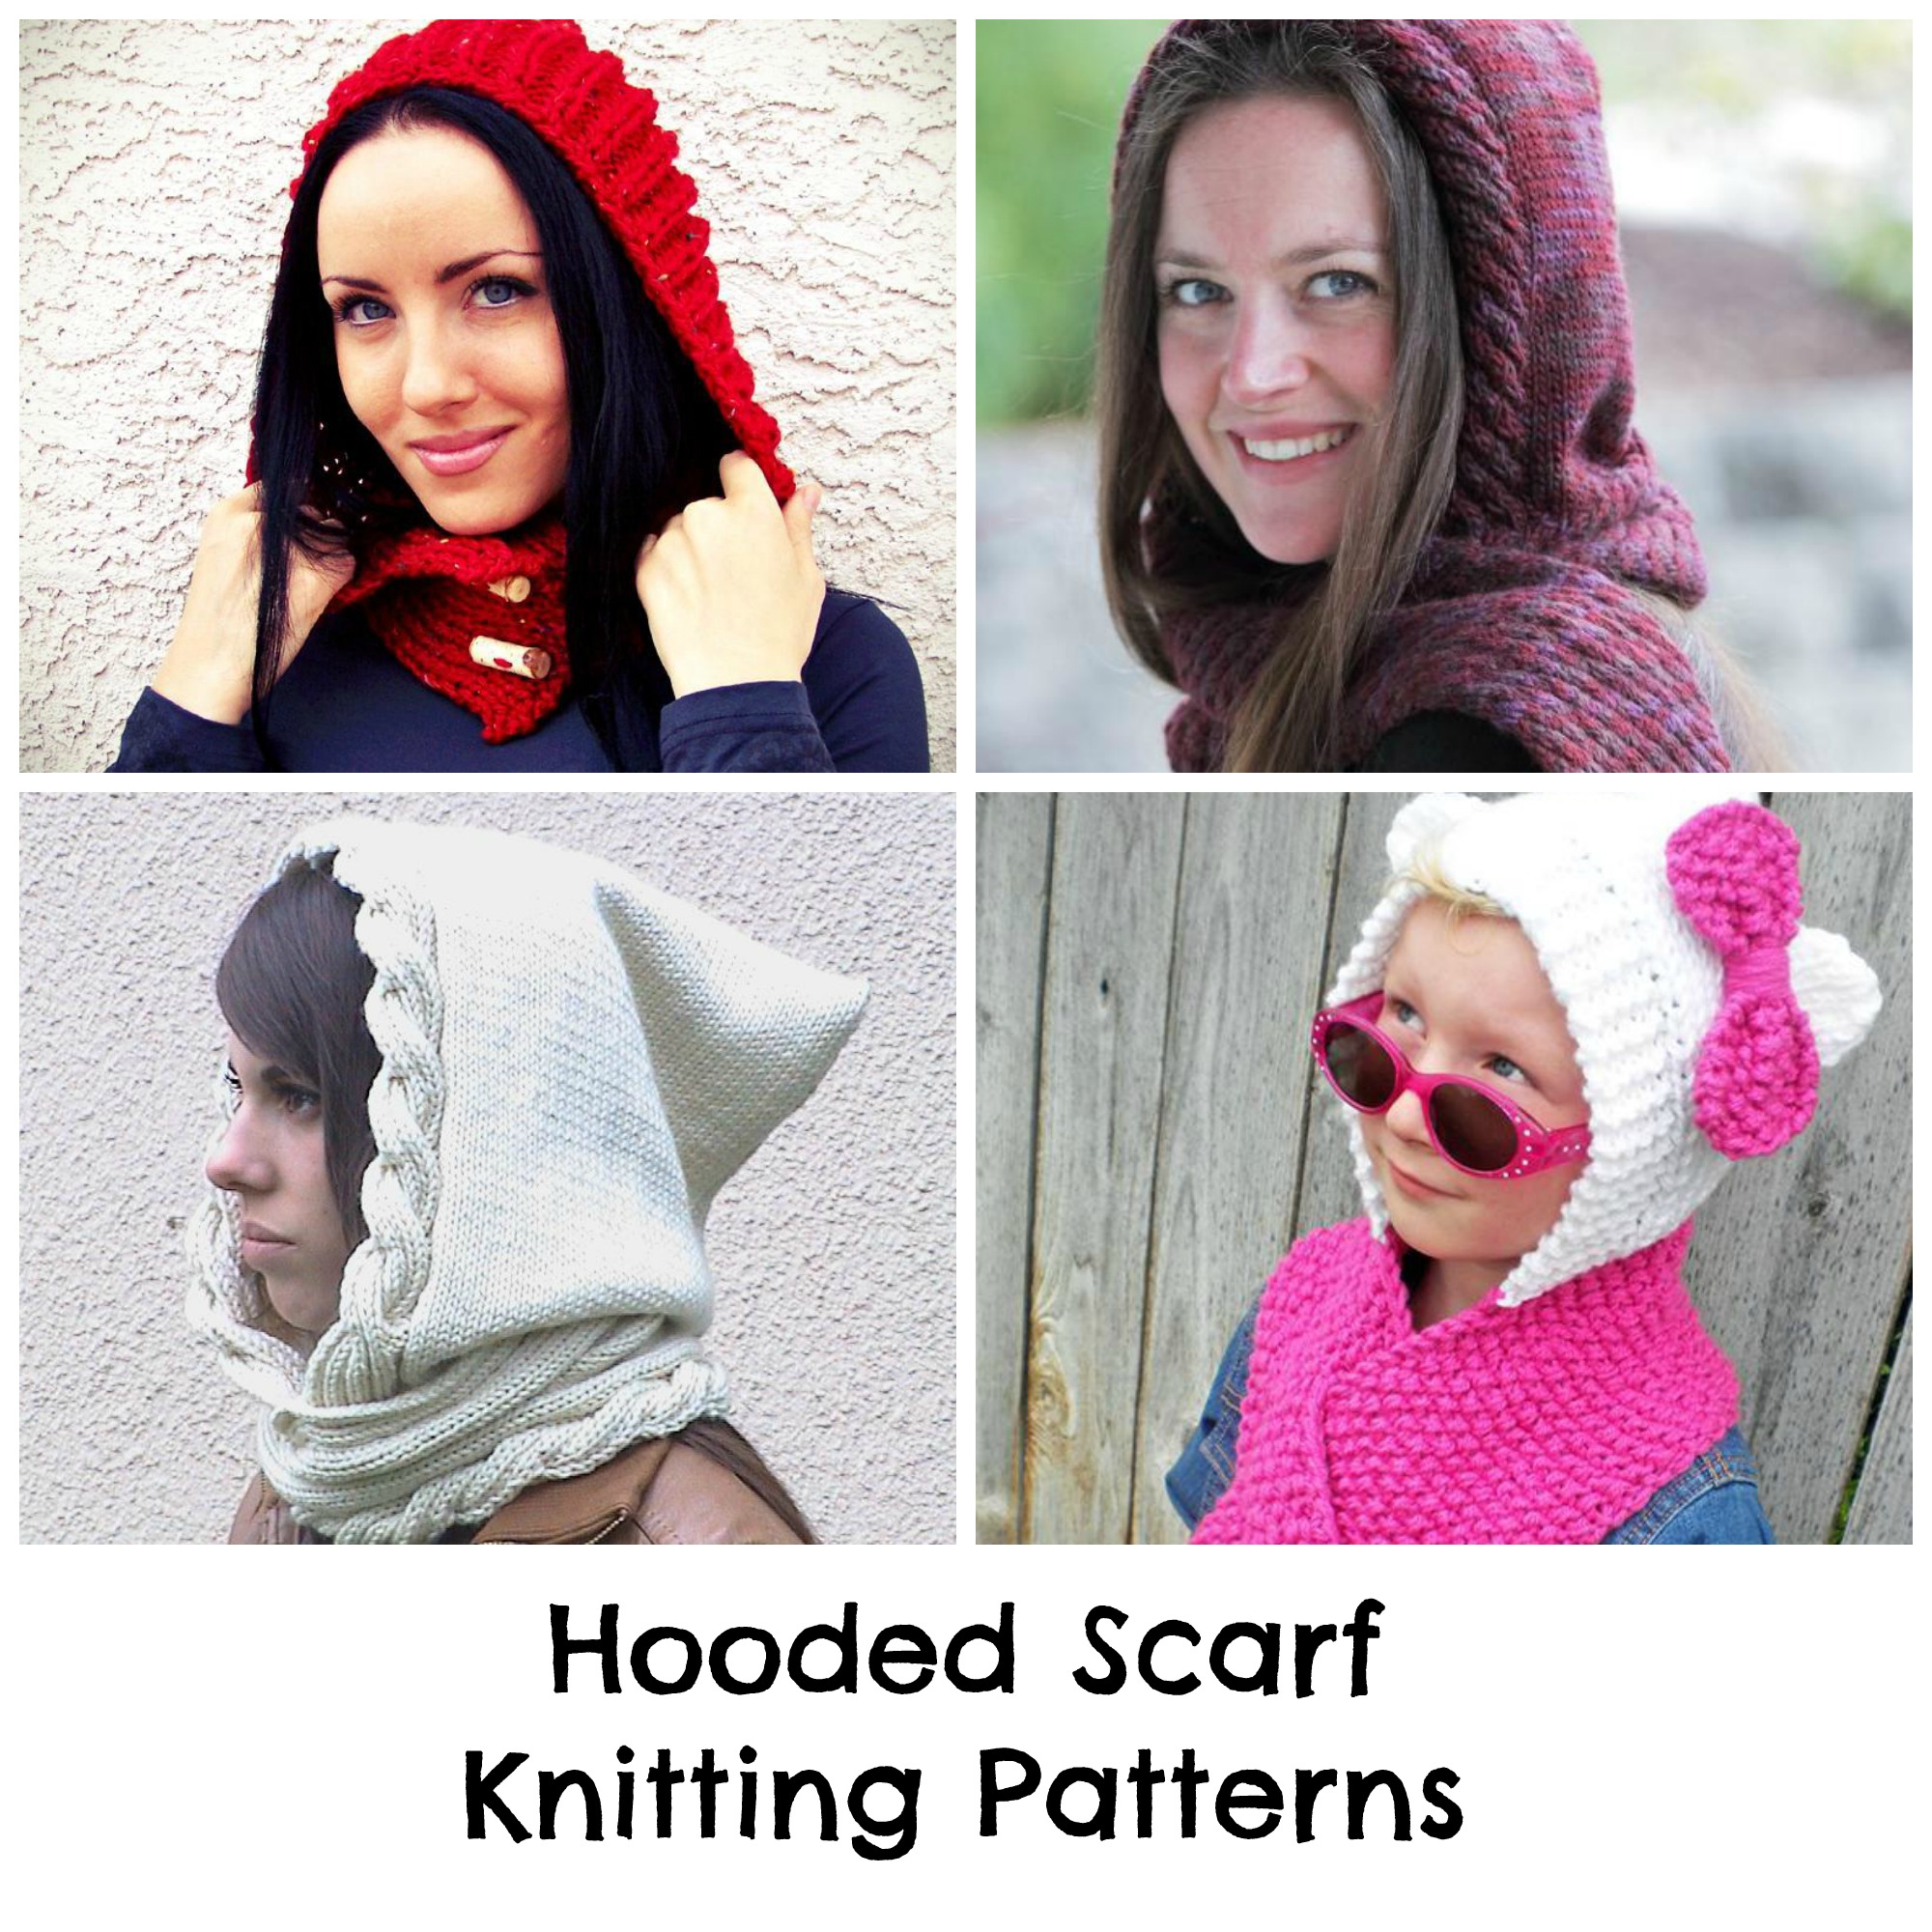 Knitted Hood Scarf Pattern Find The Perfect Hooded Scarf Knitting Pattern